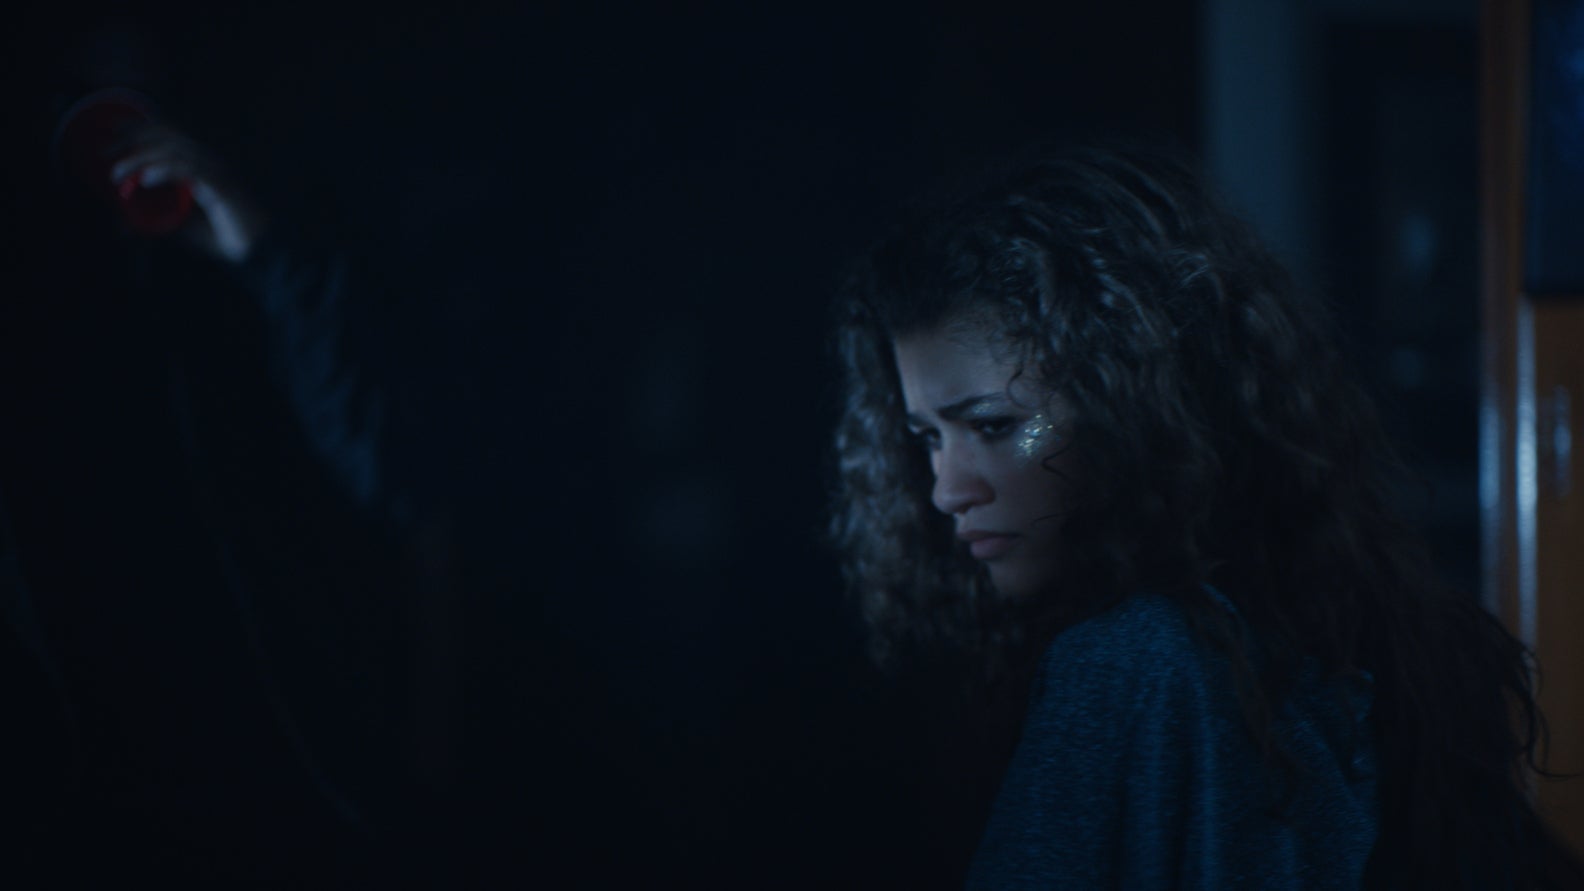 Watch: HBO Releases New Teaser Trailer For The Long-Awaited Second Season Of 'Euphoria'